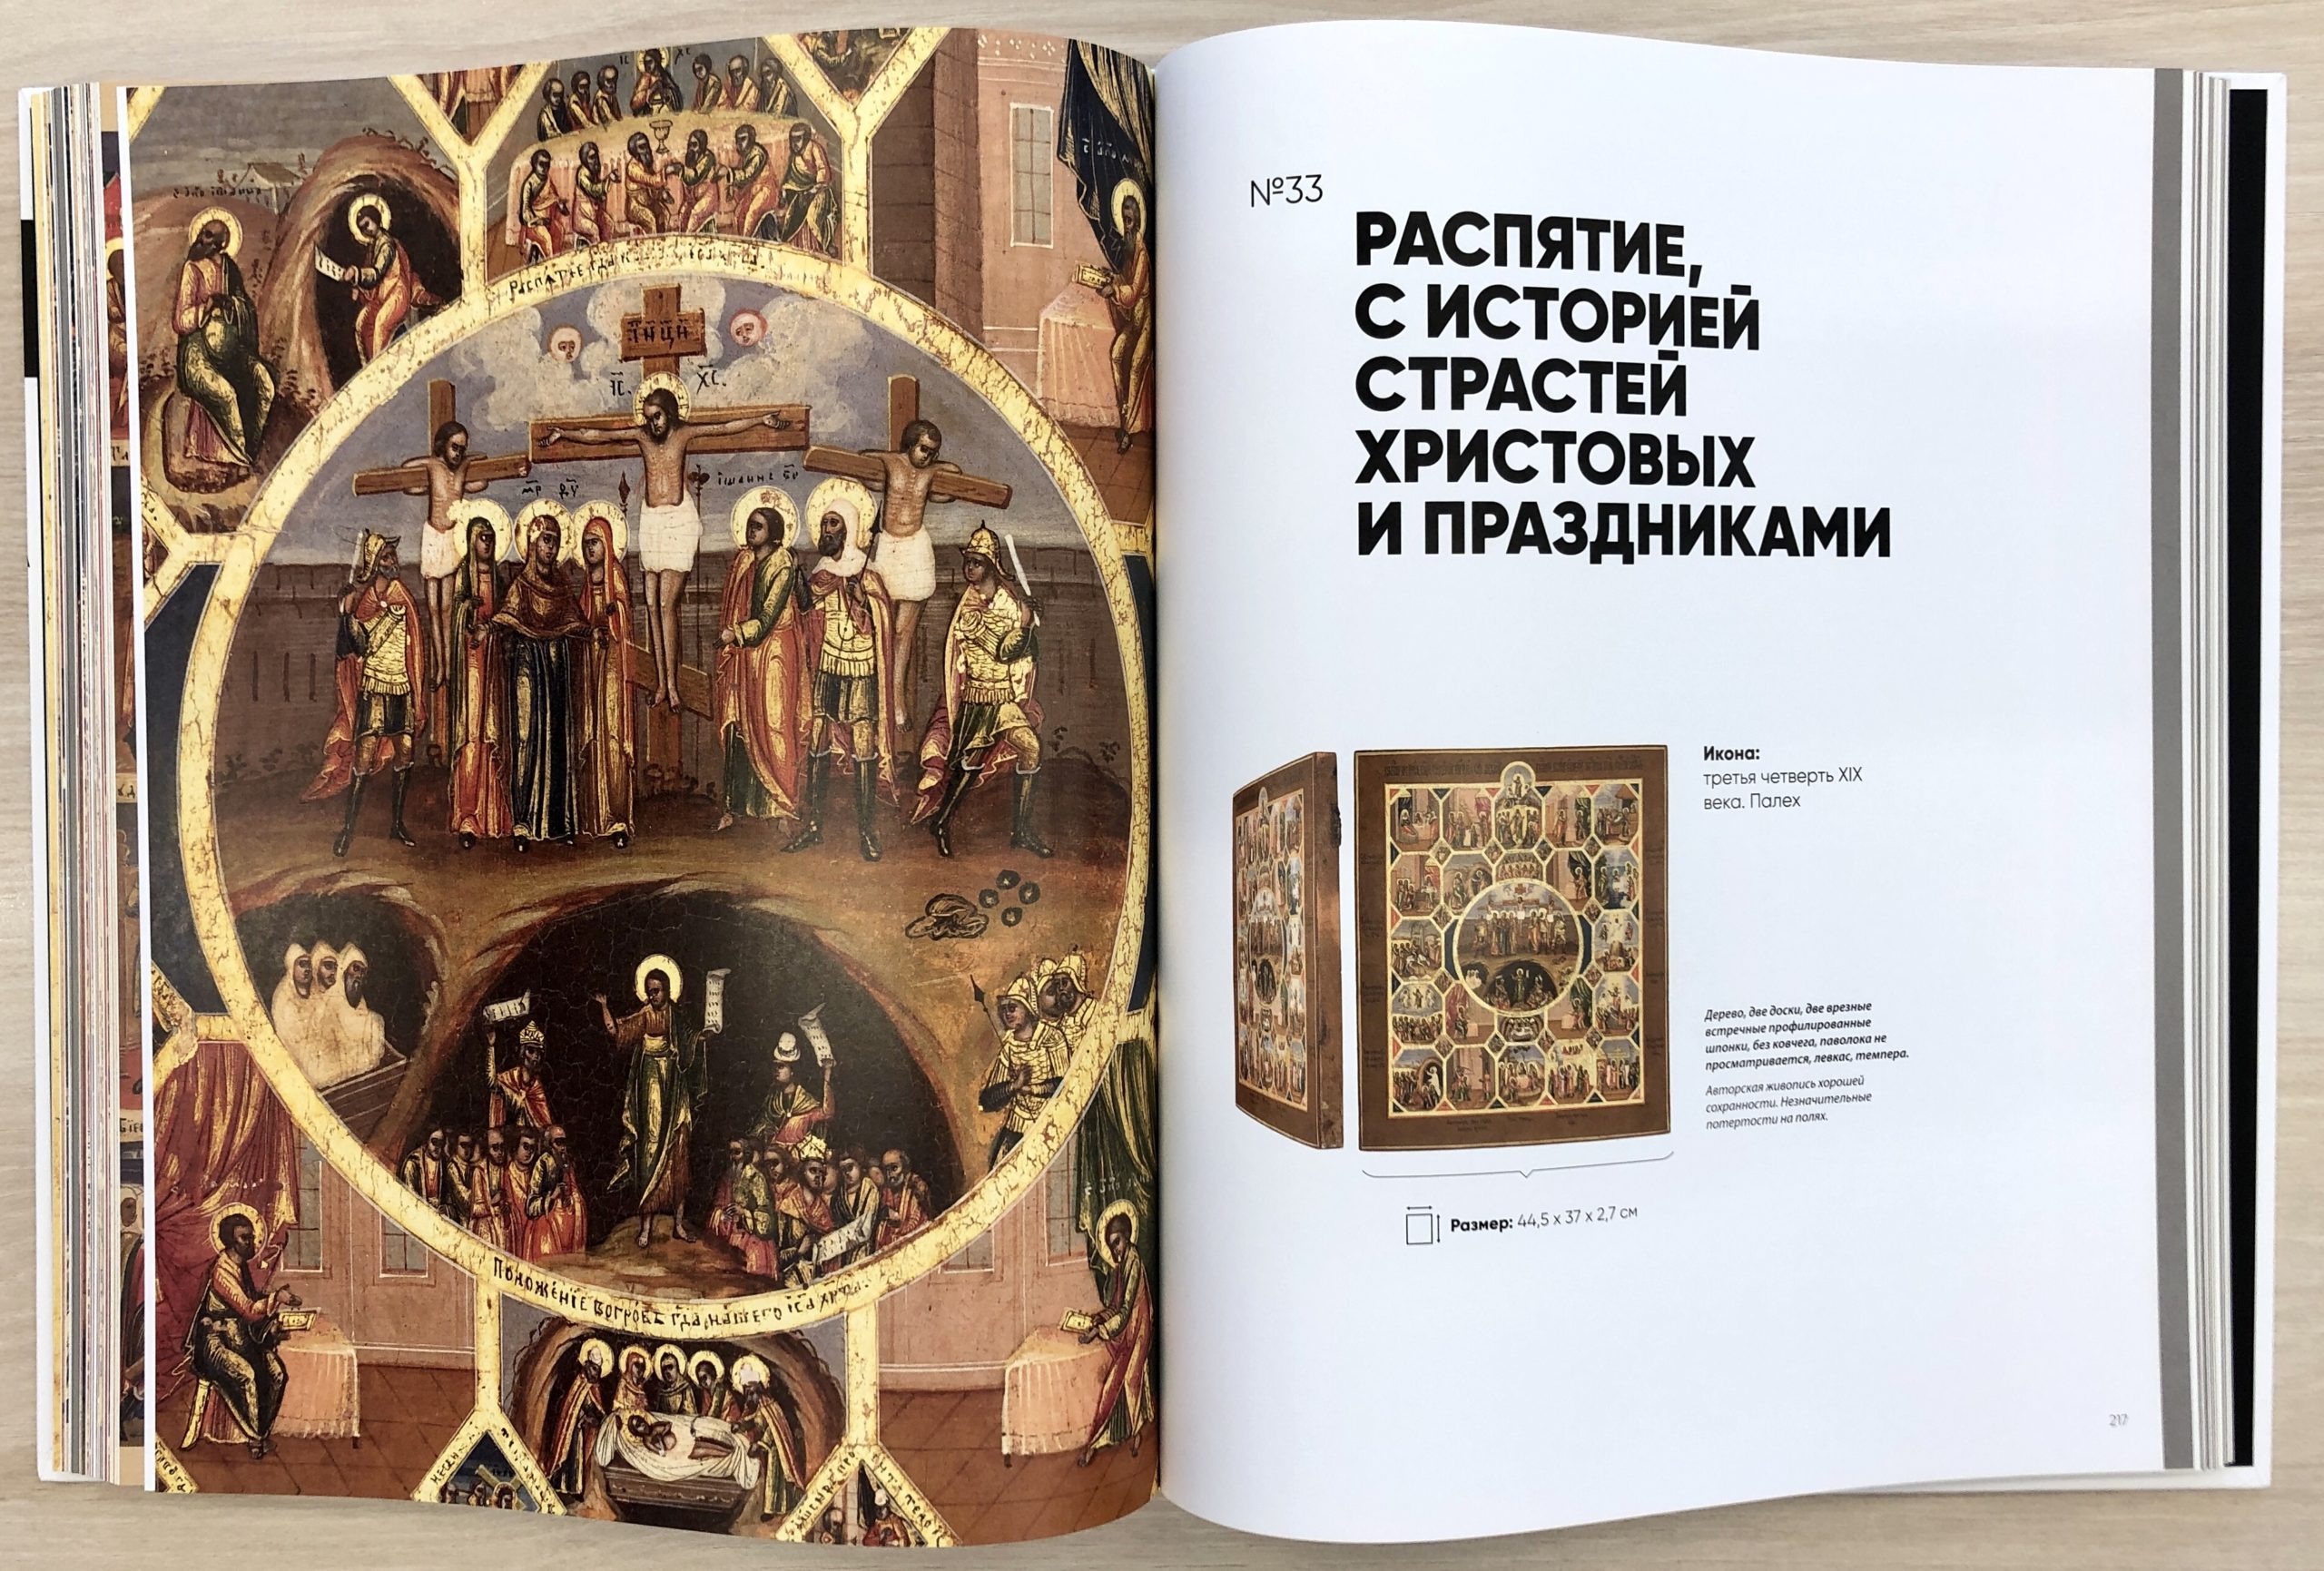 The First Scholarly Catalog of the Russian Icon Collection Released